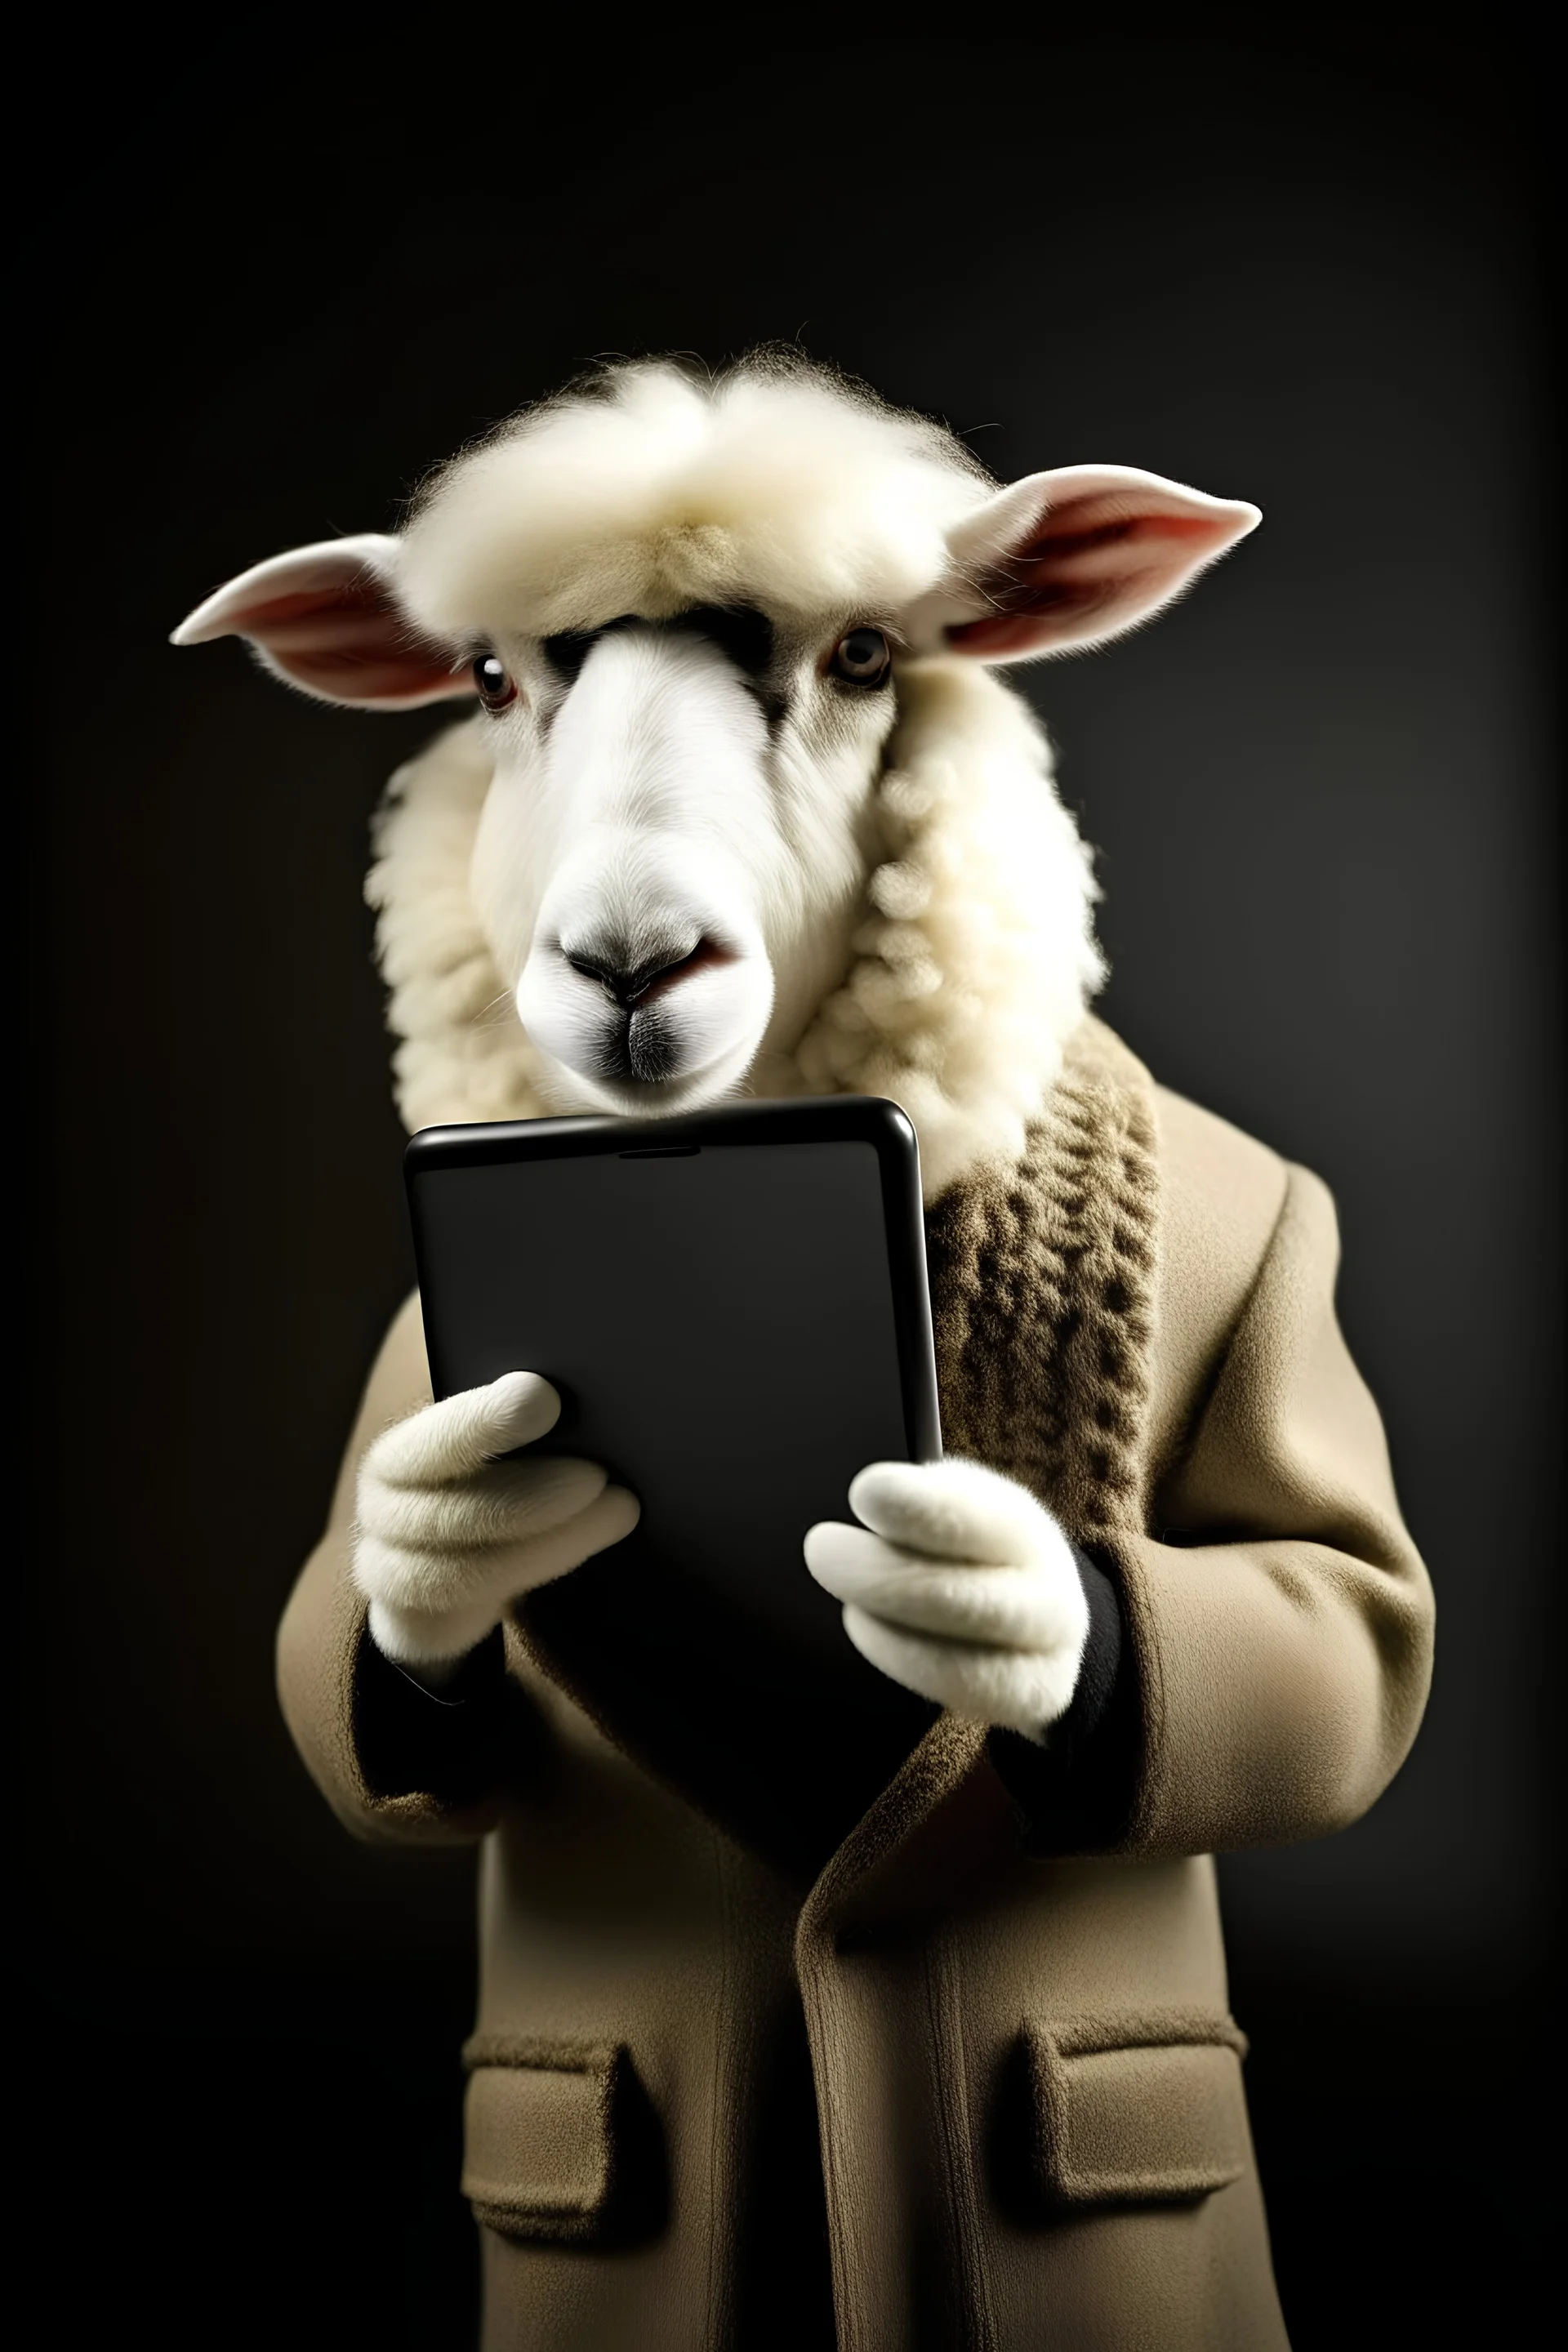 sheep dressed as lawyer and scrolling smartphone